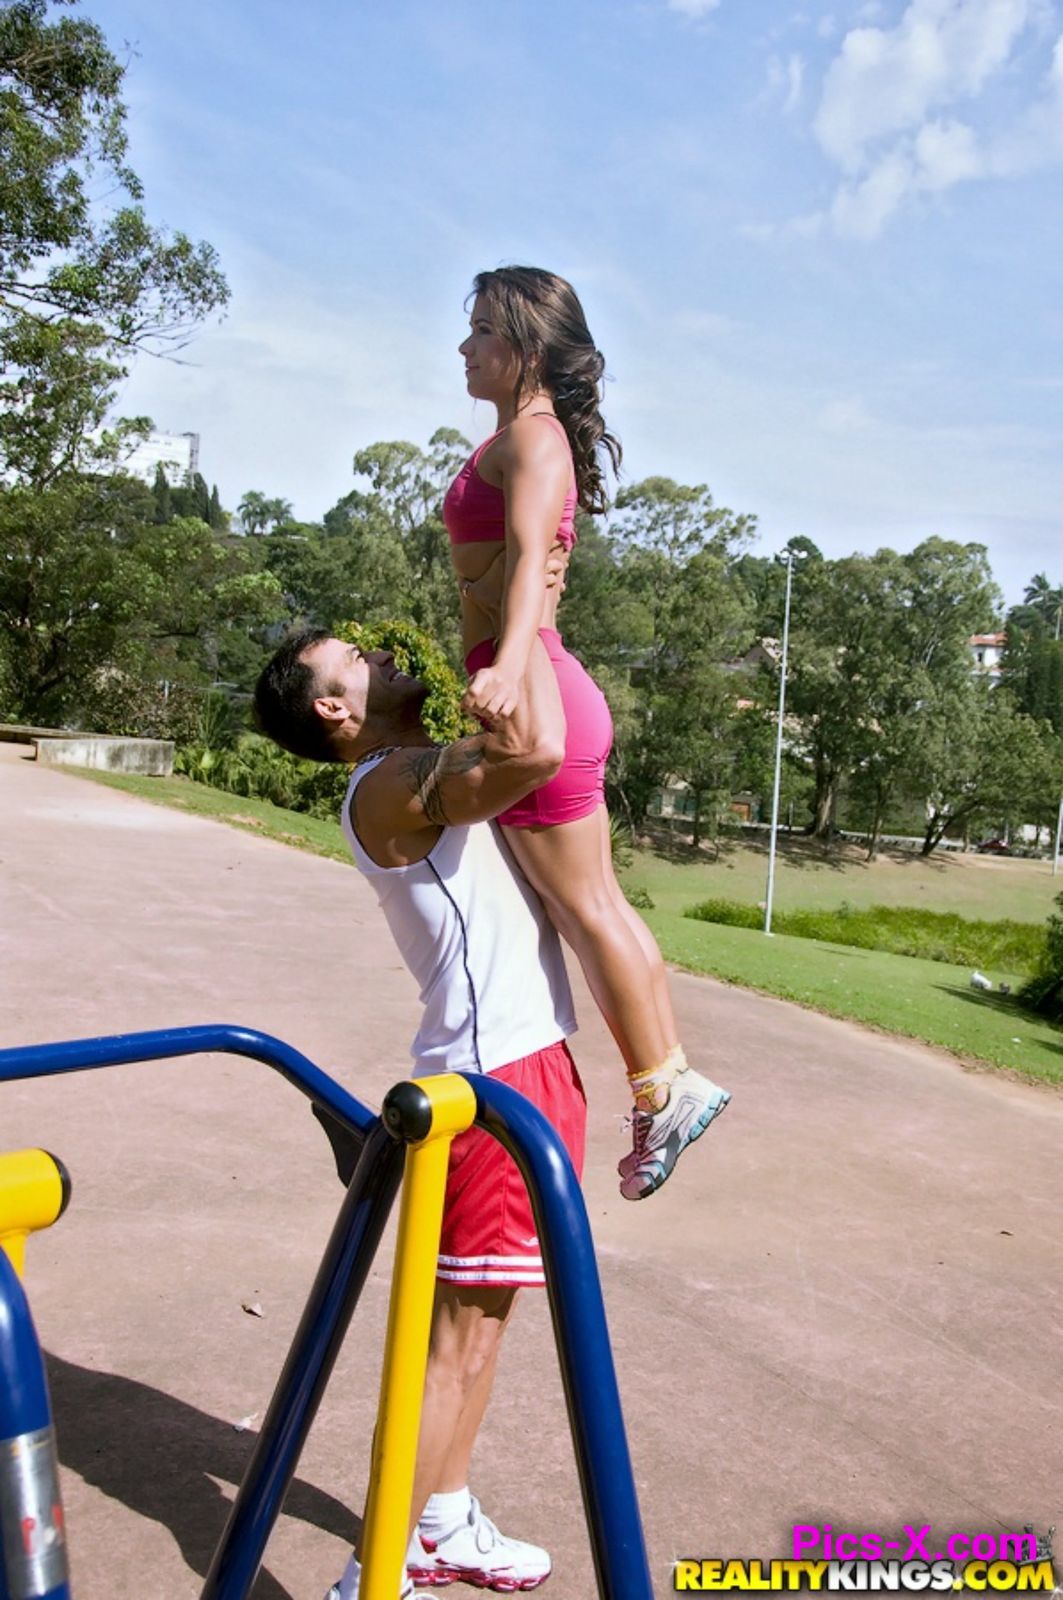 Complete Workout - Mike in Brazil - Image 34